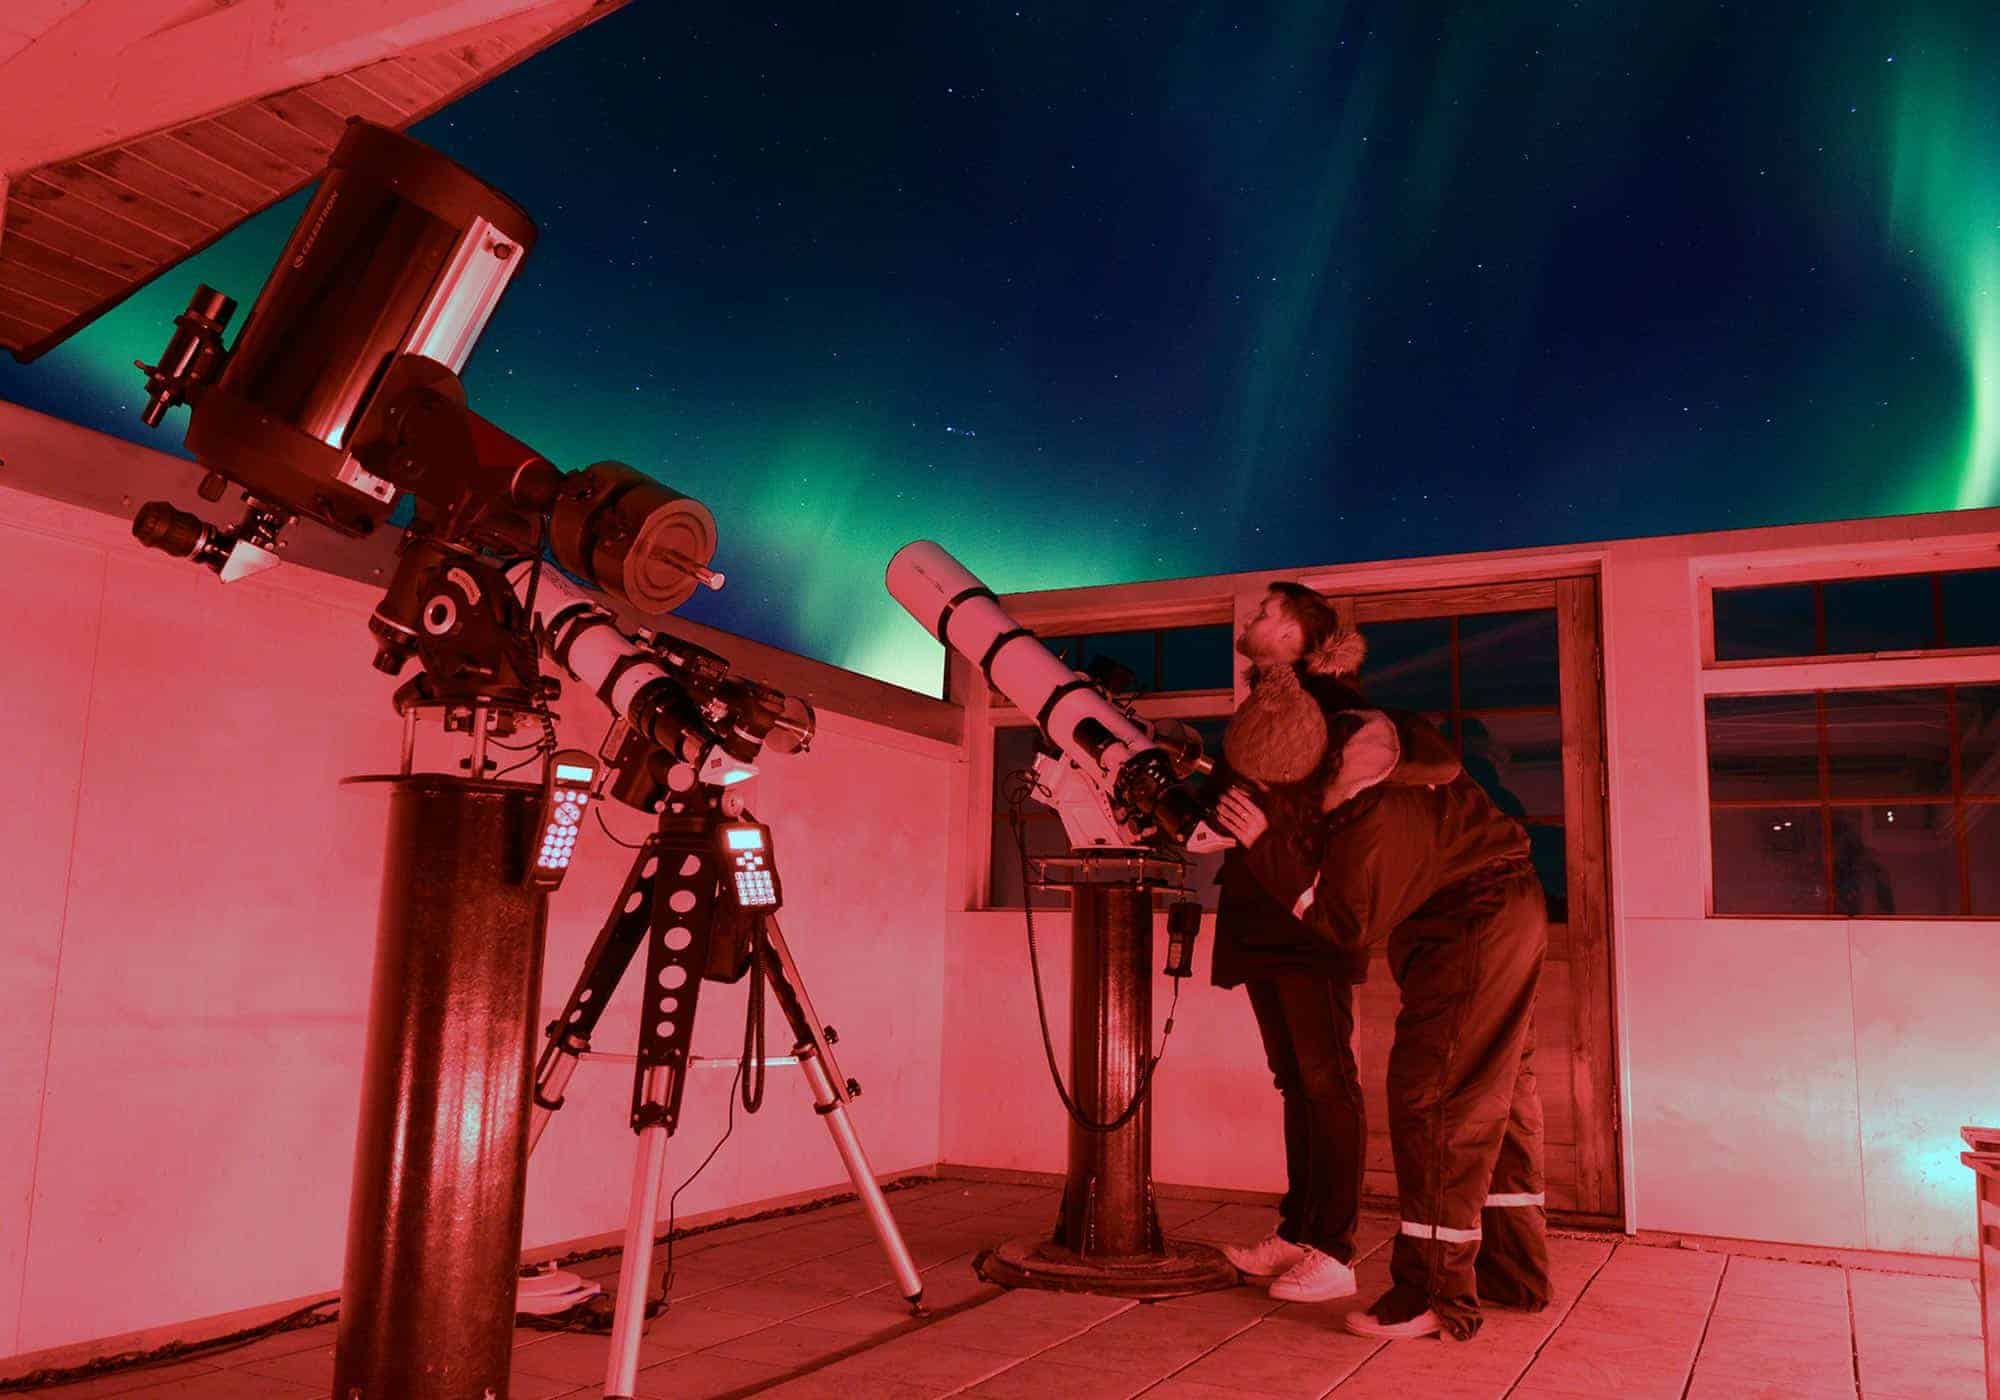 Guest looks through telescope into the night sky filled with northern lights in Hotel Rangá's Observatory.